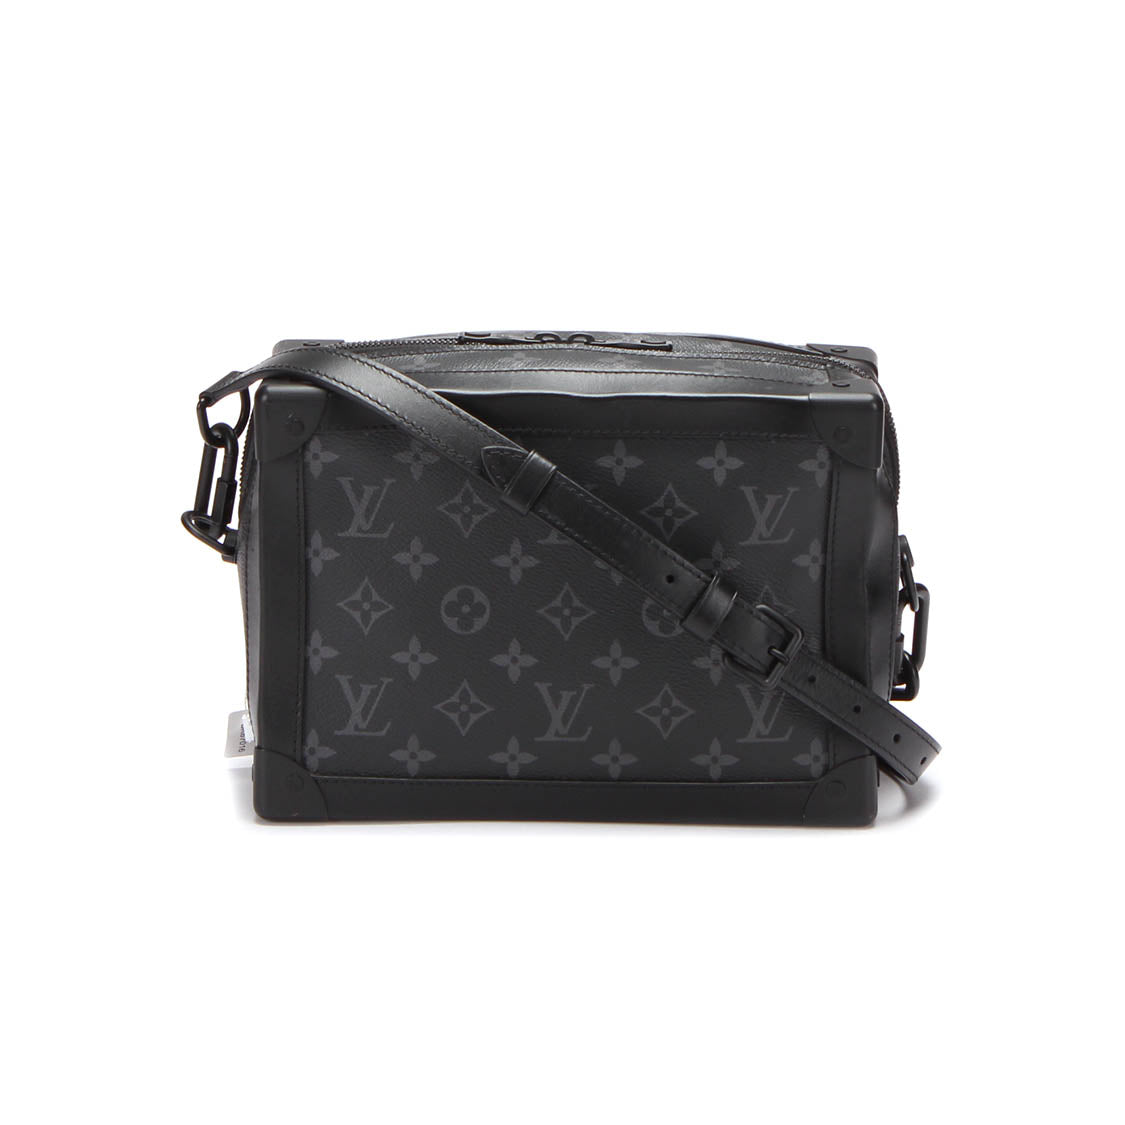 Louis Vuitton ECLIPSE Mini Soft Trunk Review, Unboxing, & Try On